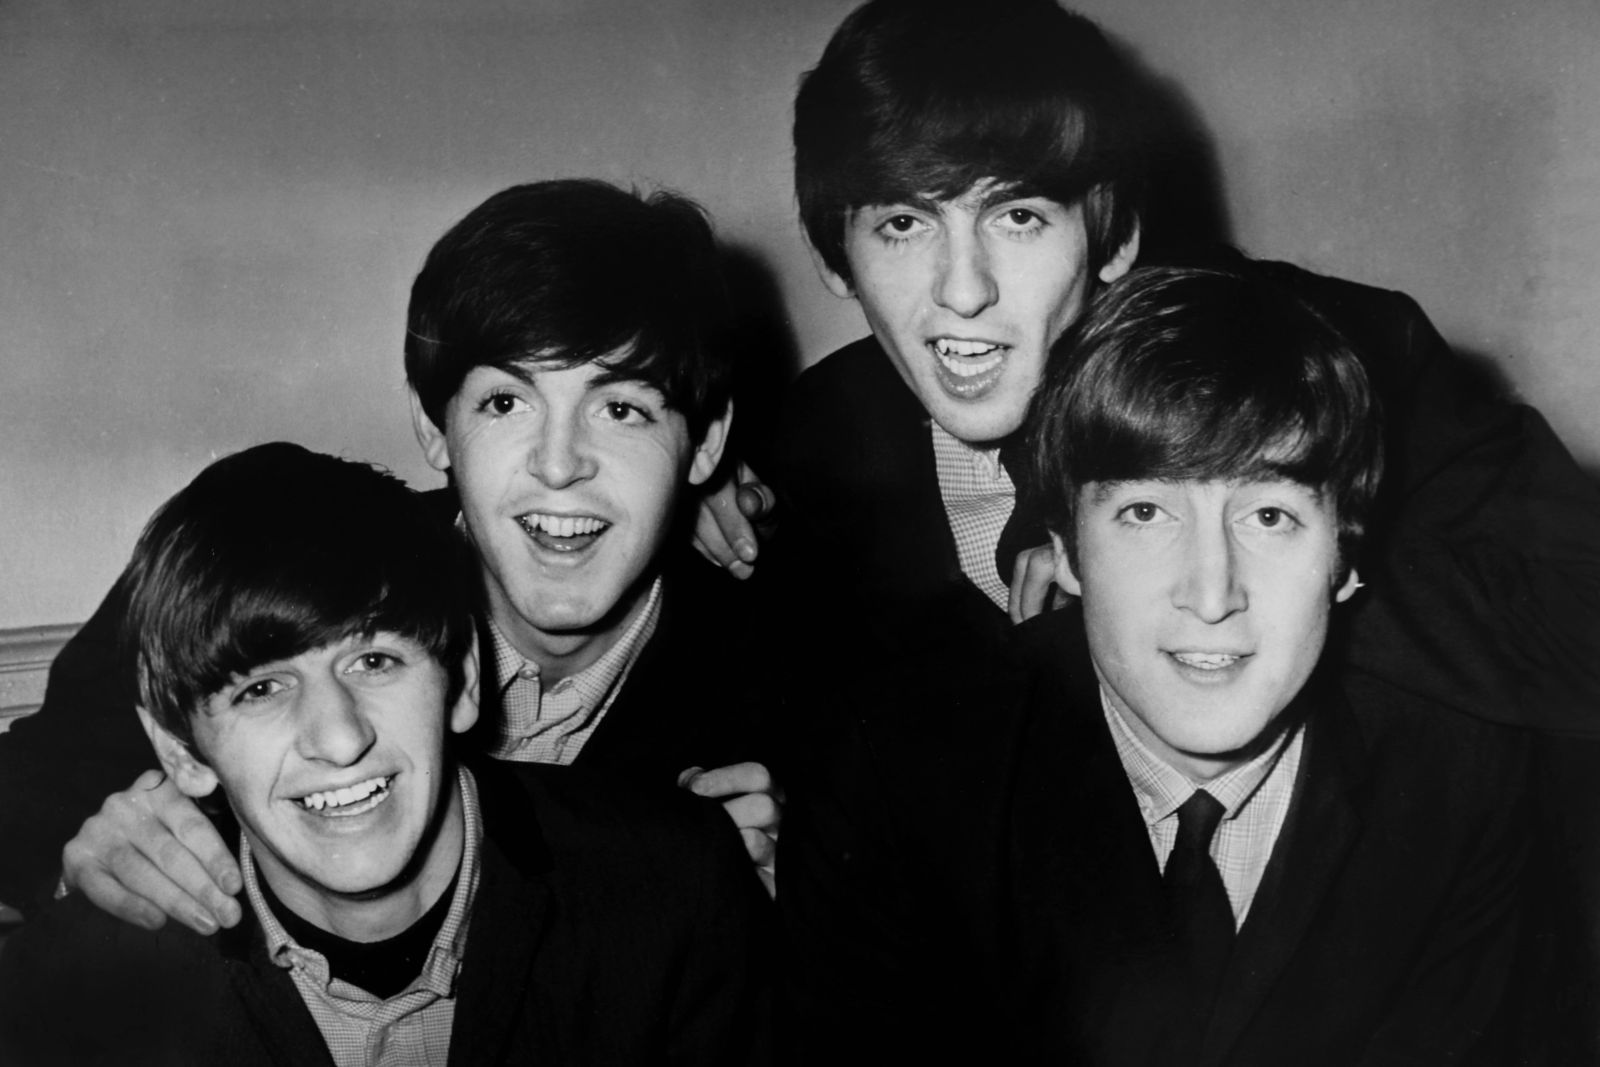 Fans of The Beatles scream during a concert in the early Sixties. Unknown, Unknown, UK, Ref:VM SHO Beatles smiling 3.jpg, The Beatles, fans, concert, screaming Copyright: xVarleyxMediax